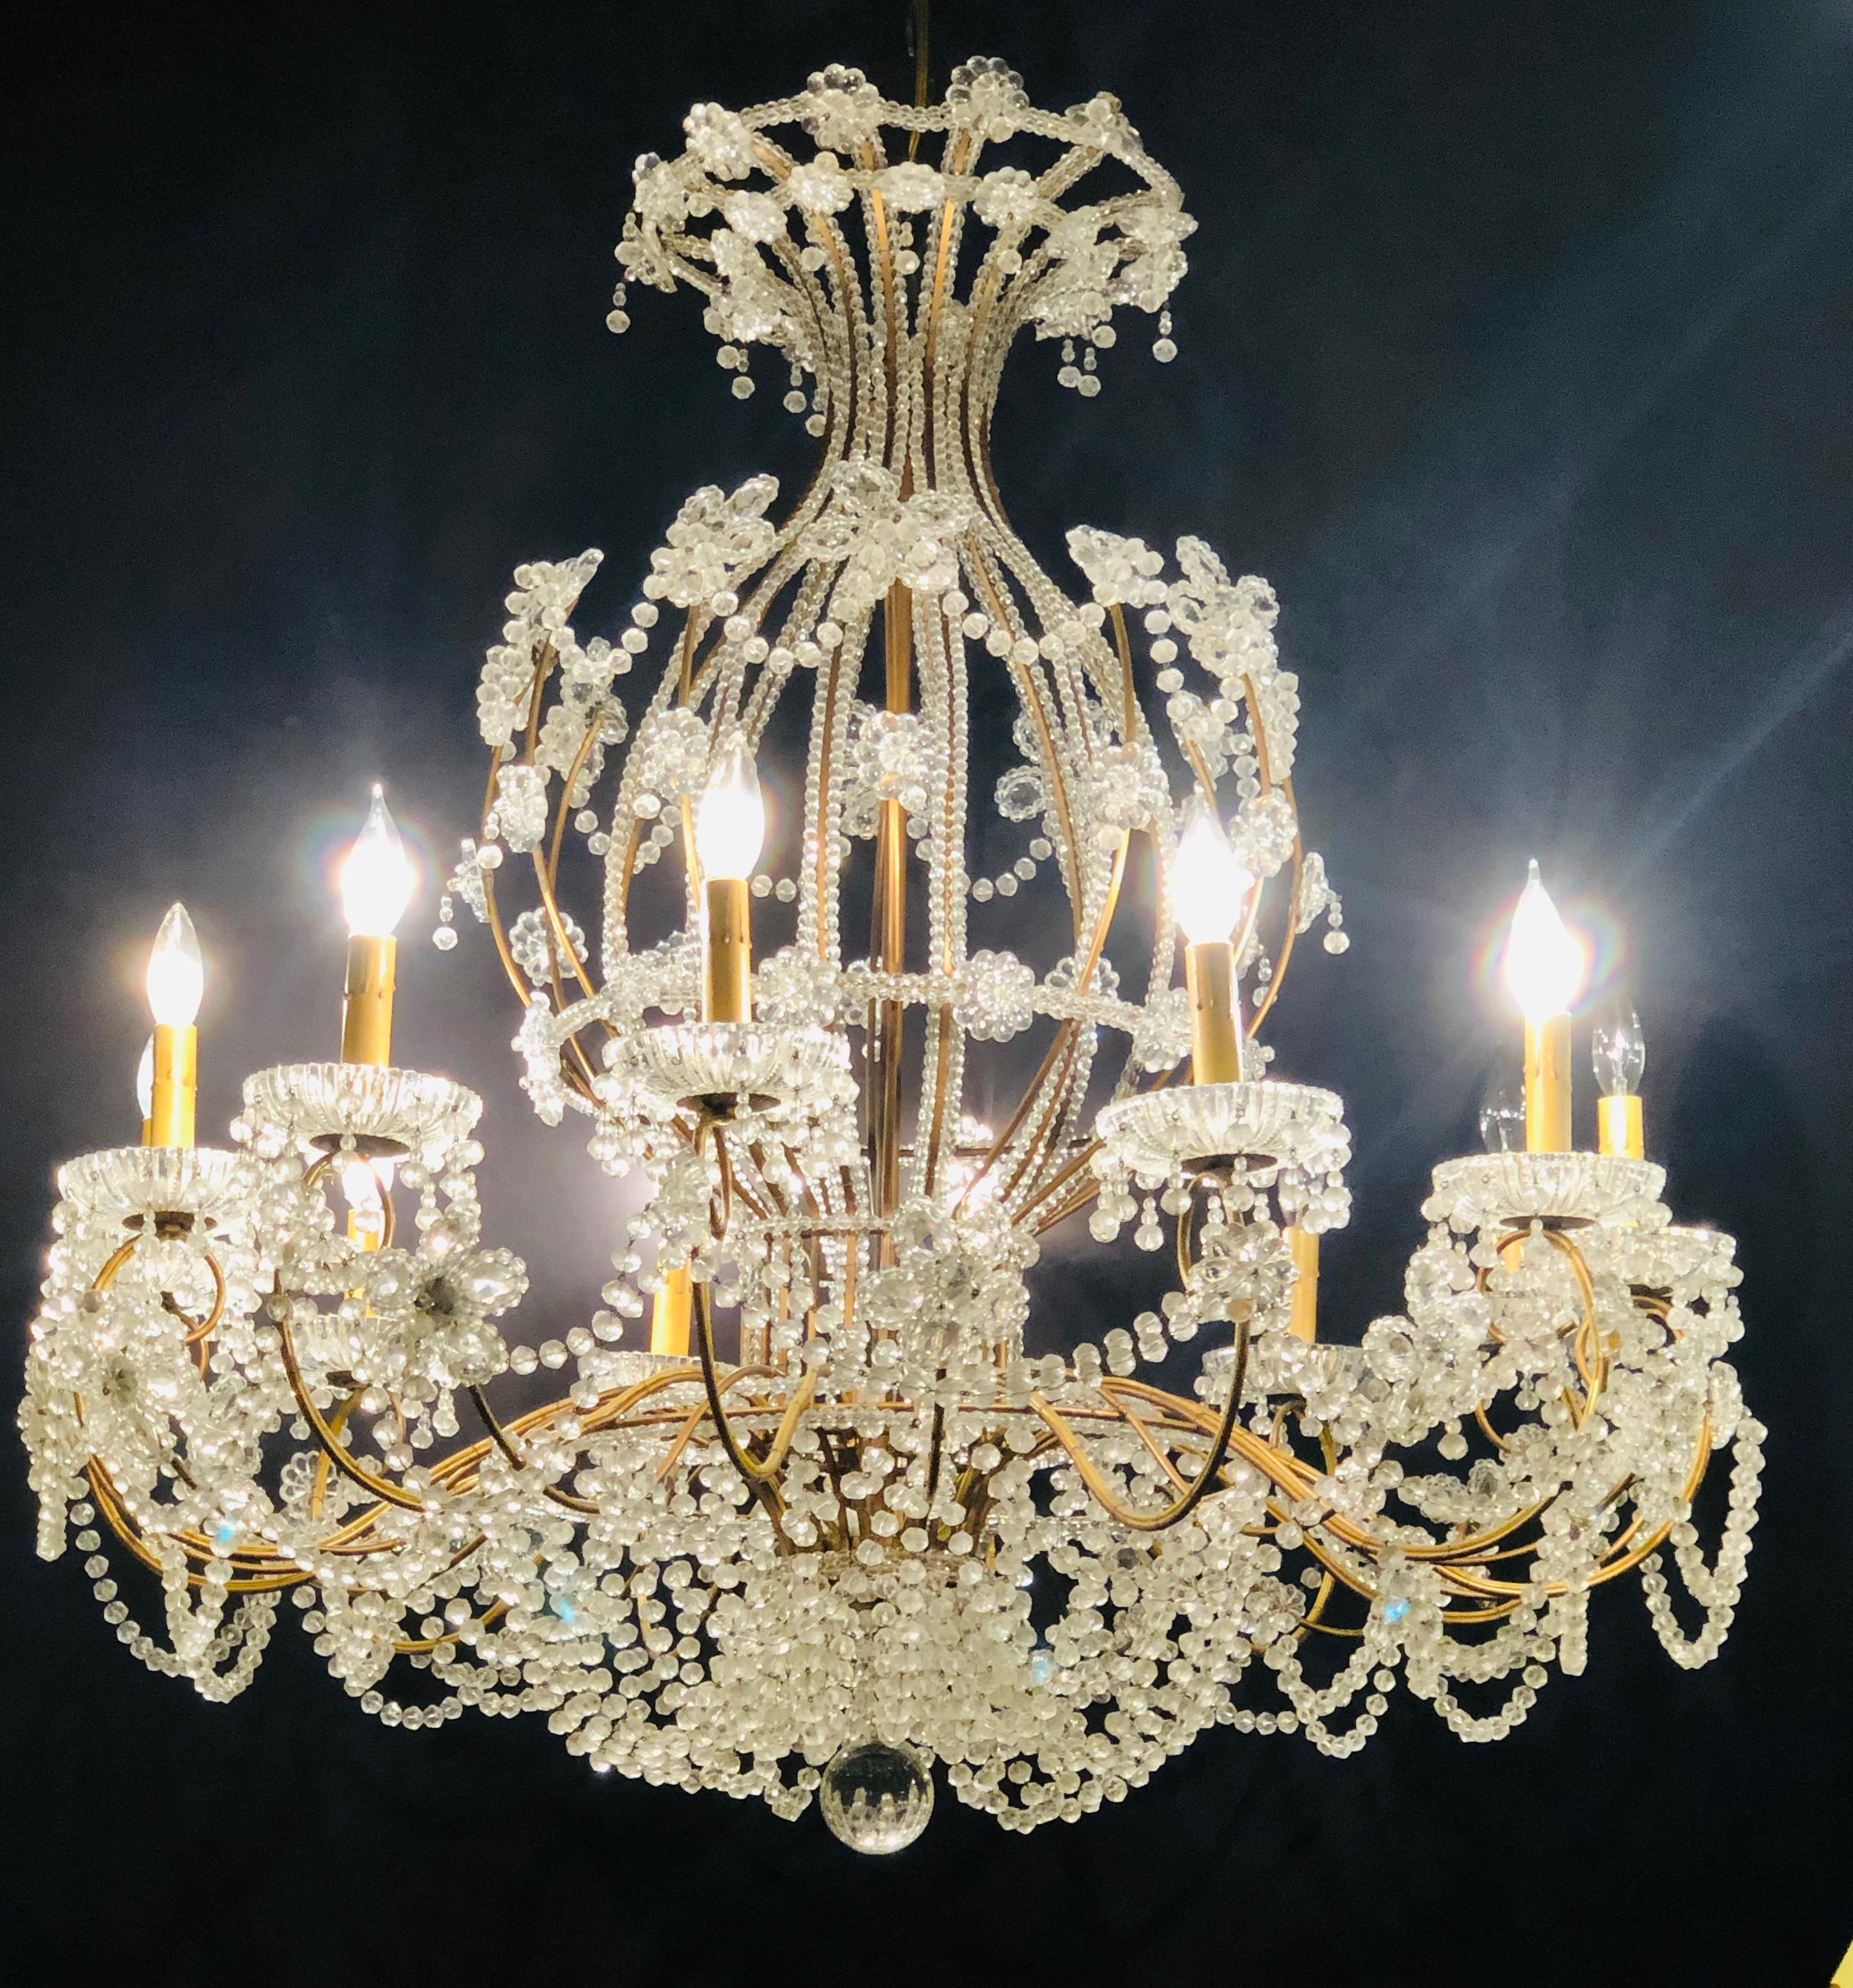 Hollywood Regency Beautiful Gilt Iron 12-Light Chandelier with Great Crystal and Bead Decoration